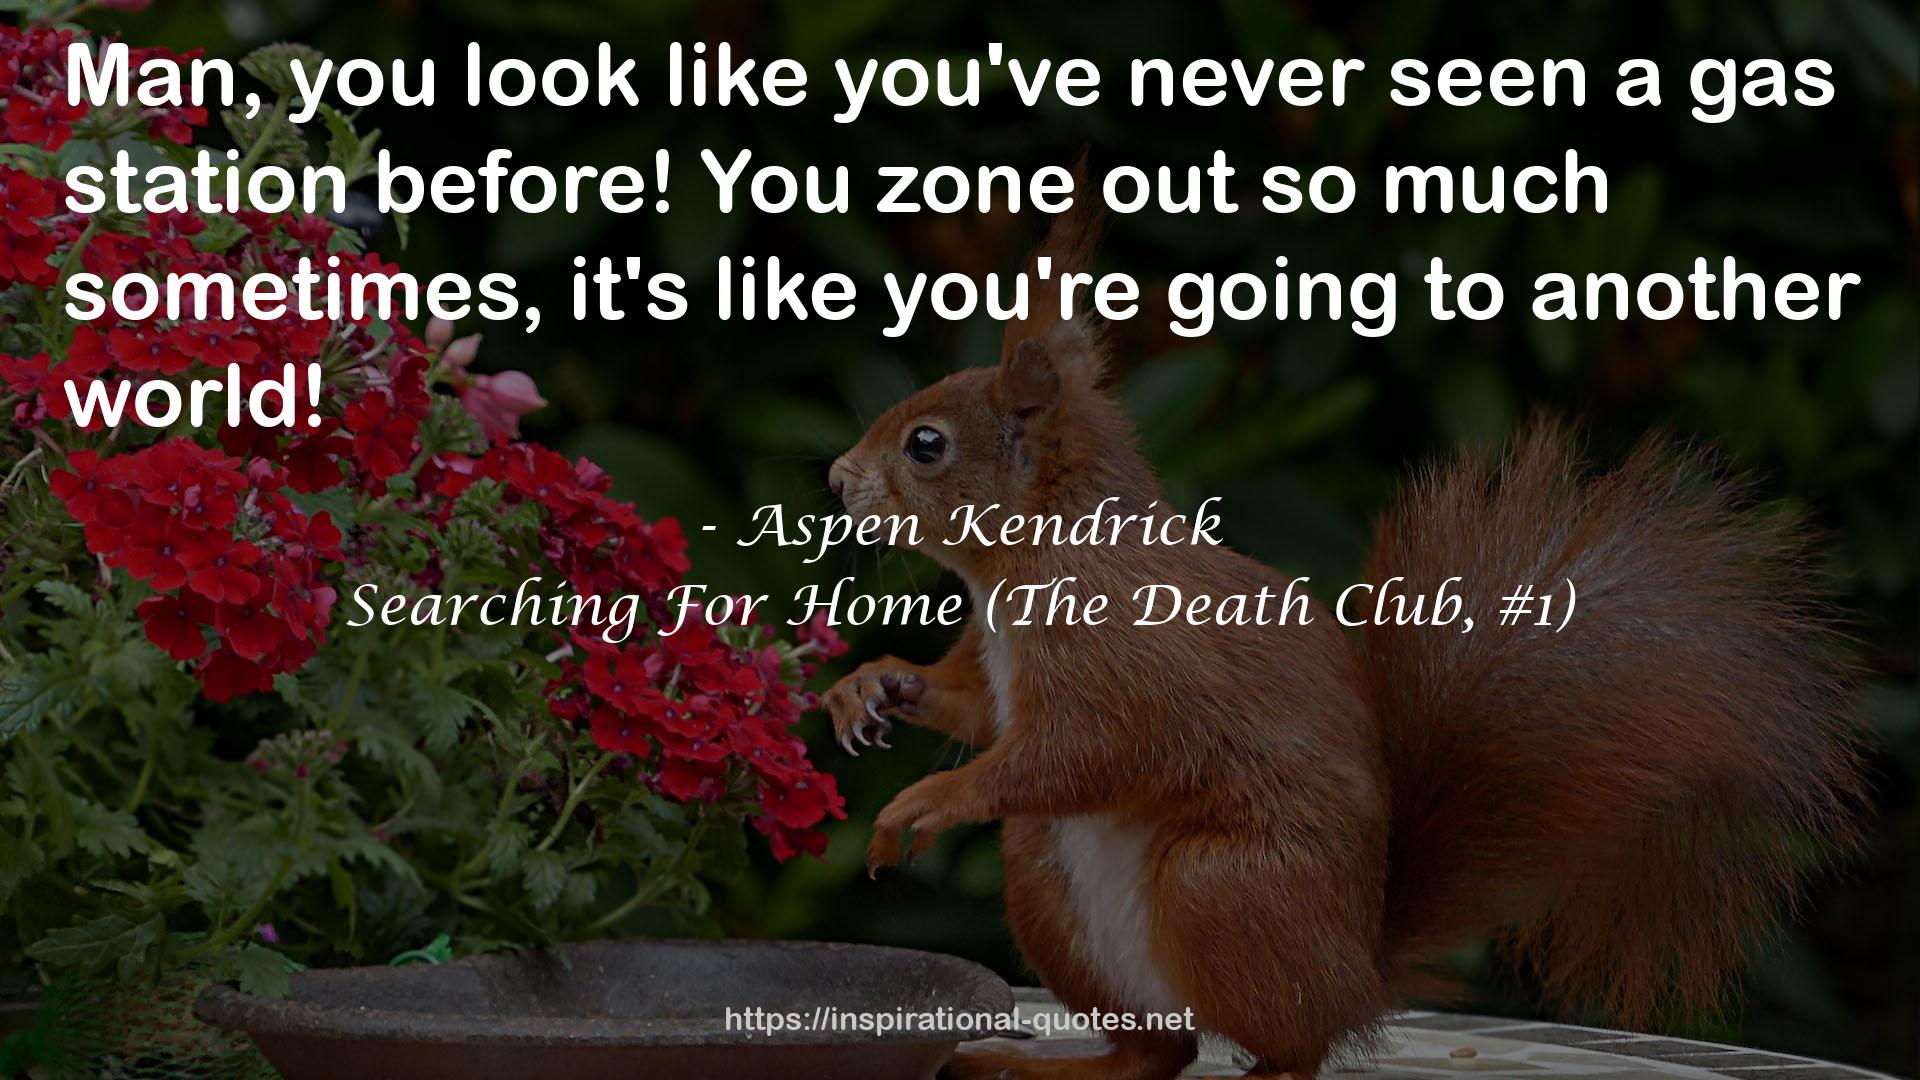 Searching For Home (The Death Club, #1) QUOTES